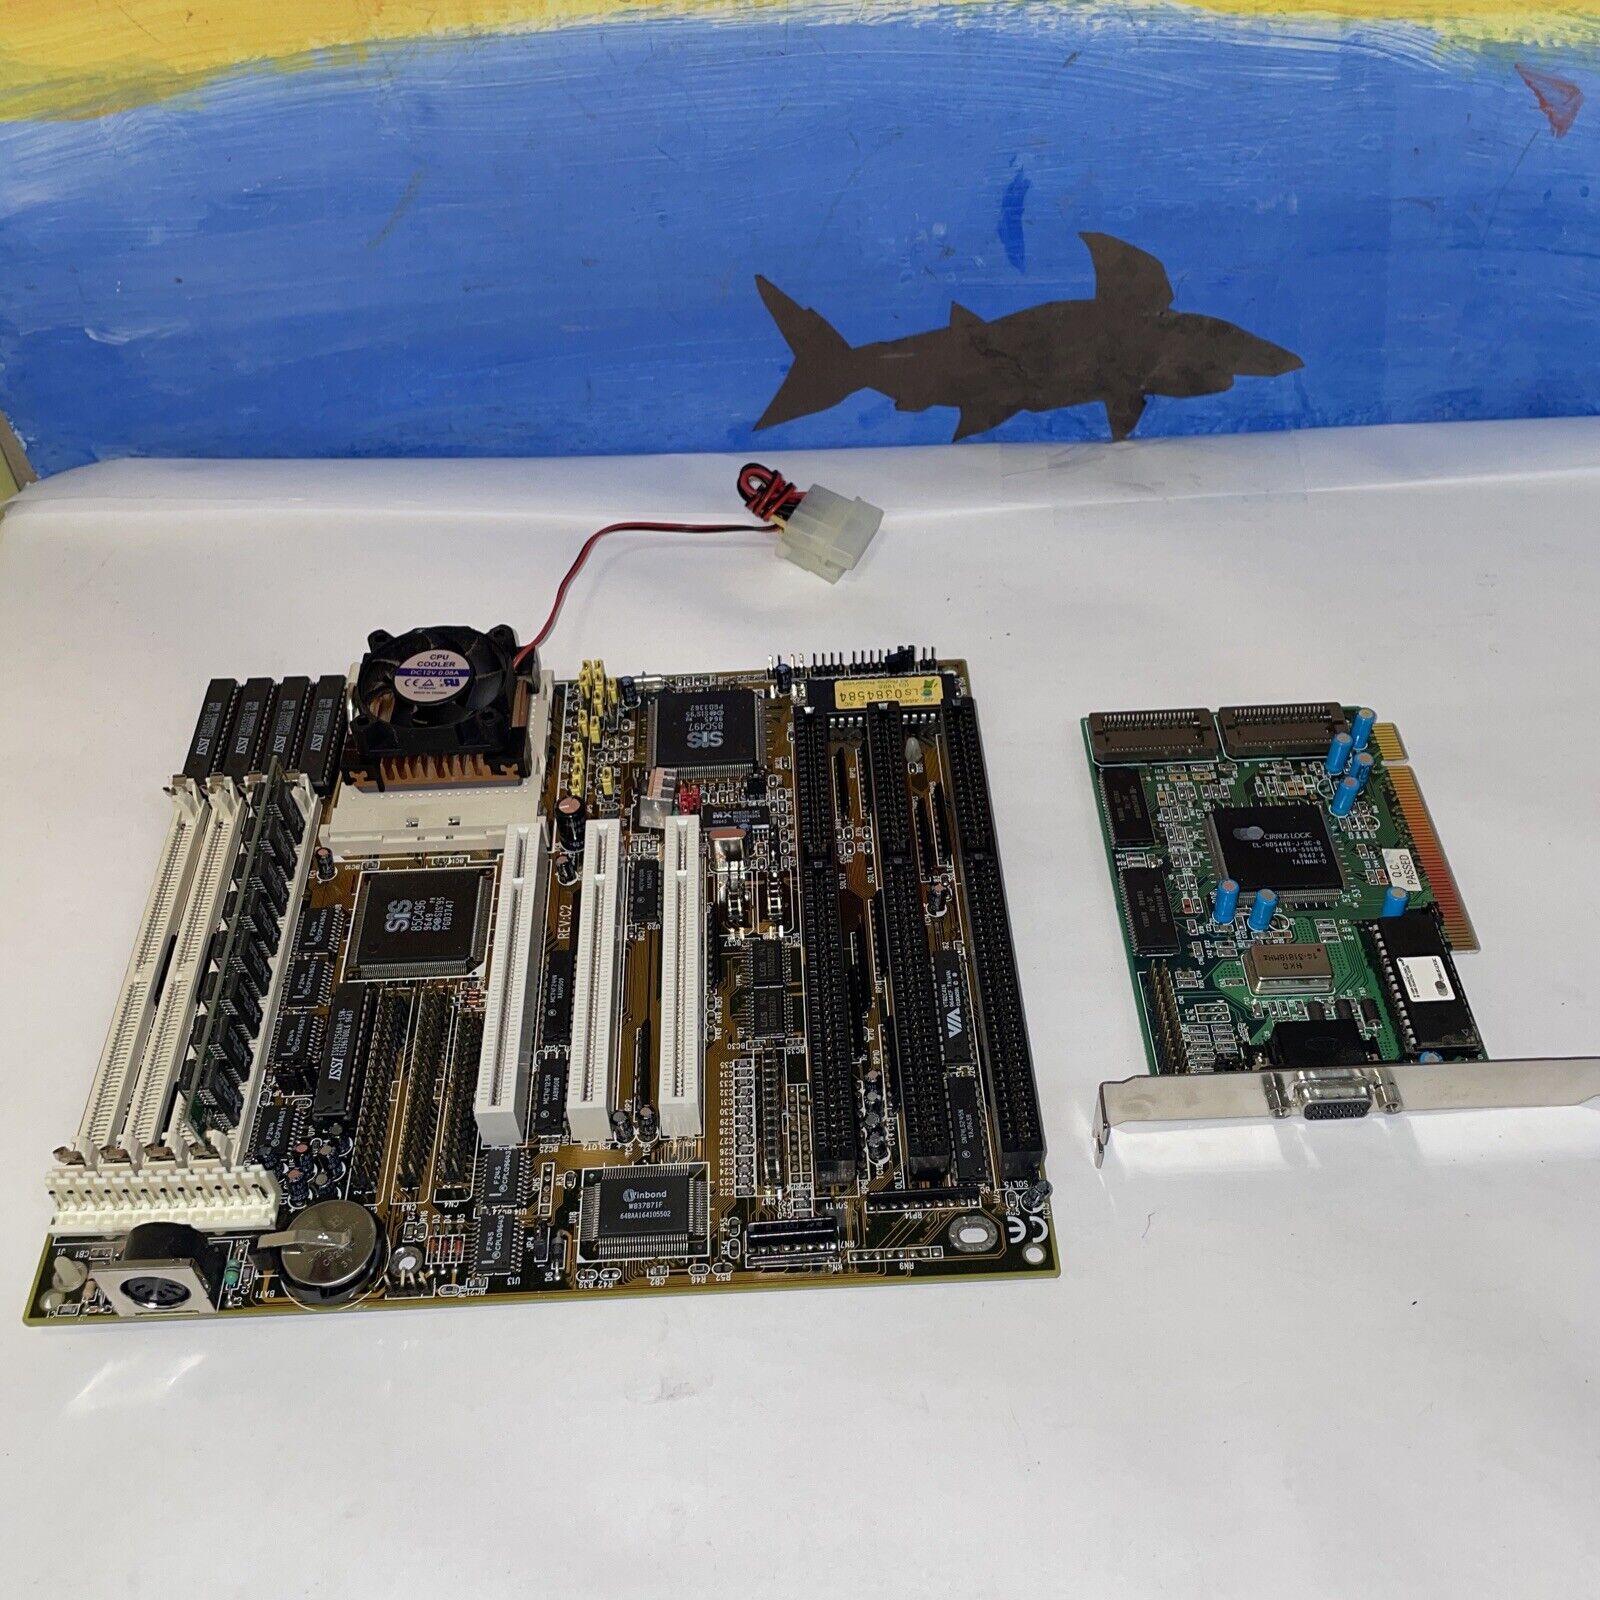 LuckyStar LS486E motherboard and Am5x86-P75-S 133MHZ CPU, 8MB ram, video card